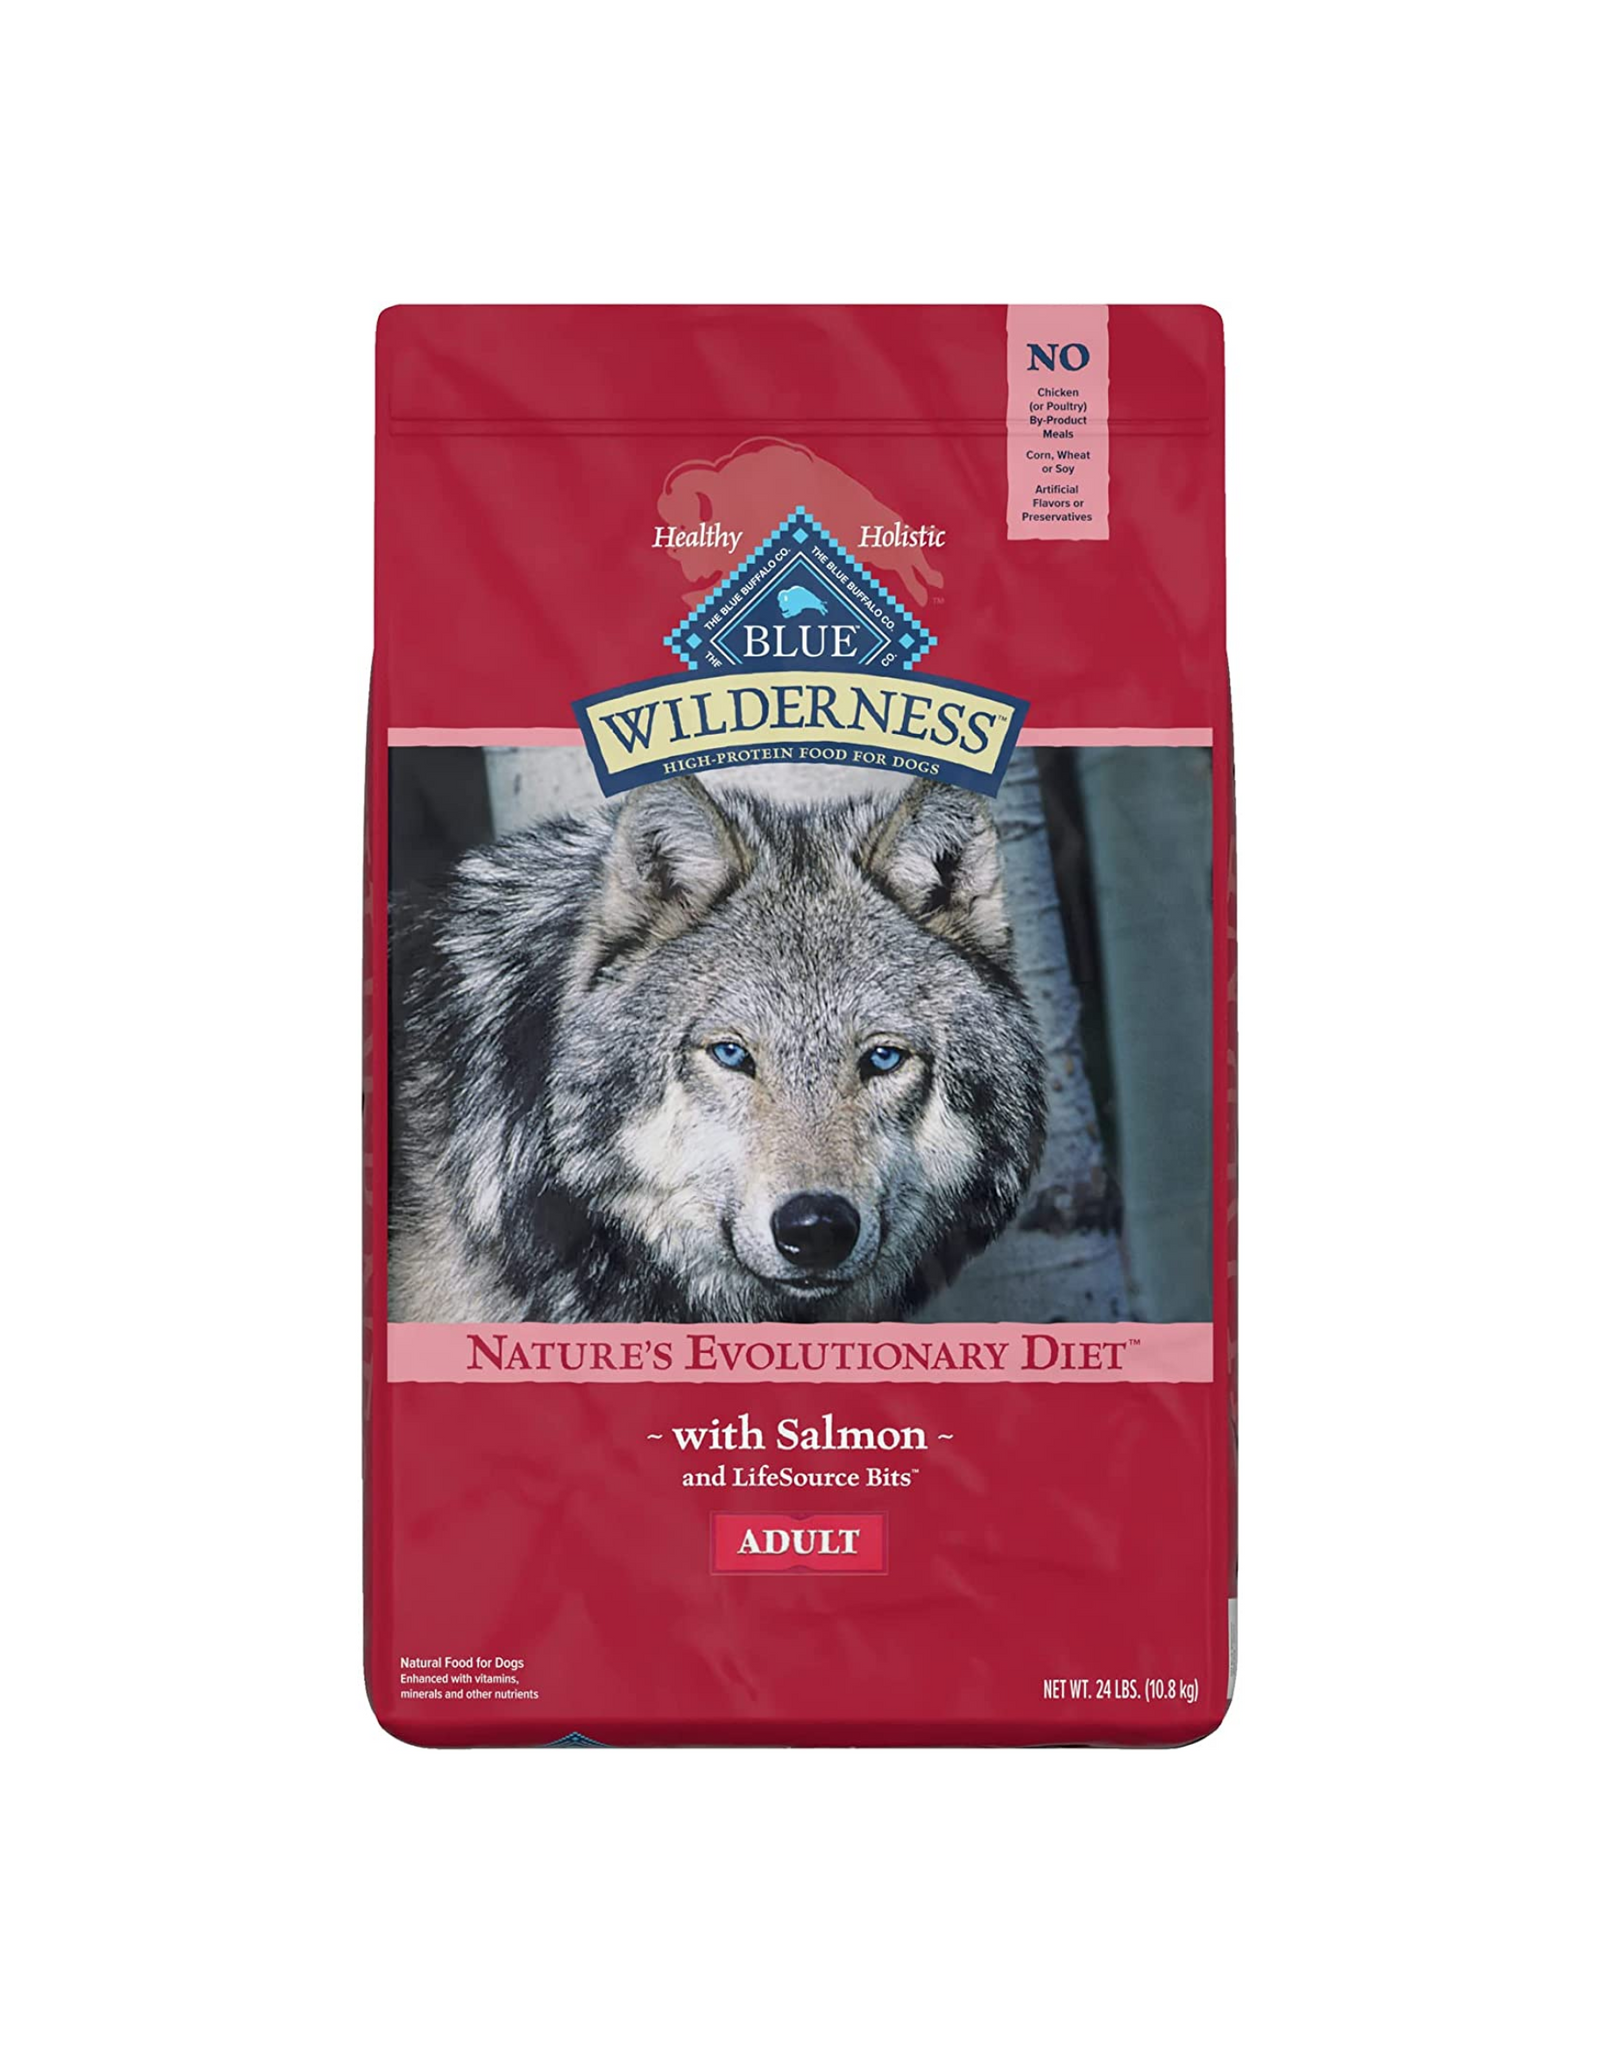 Blue Buffalo Wilderness High Protein, Natural Adult Dry Dog Food, Salmon 24 lbs.